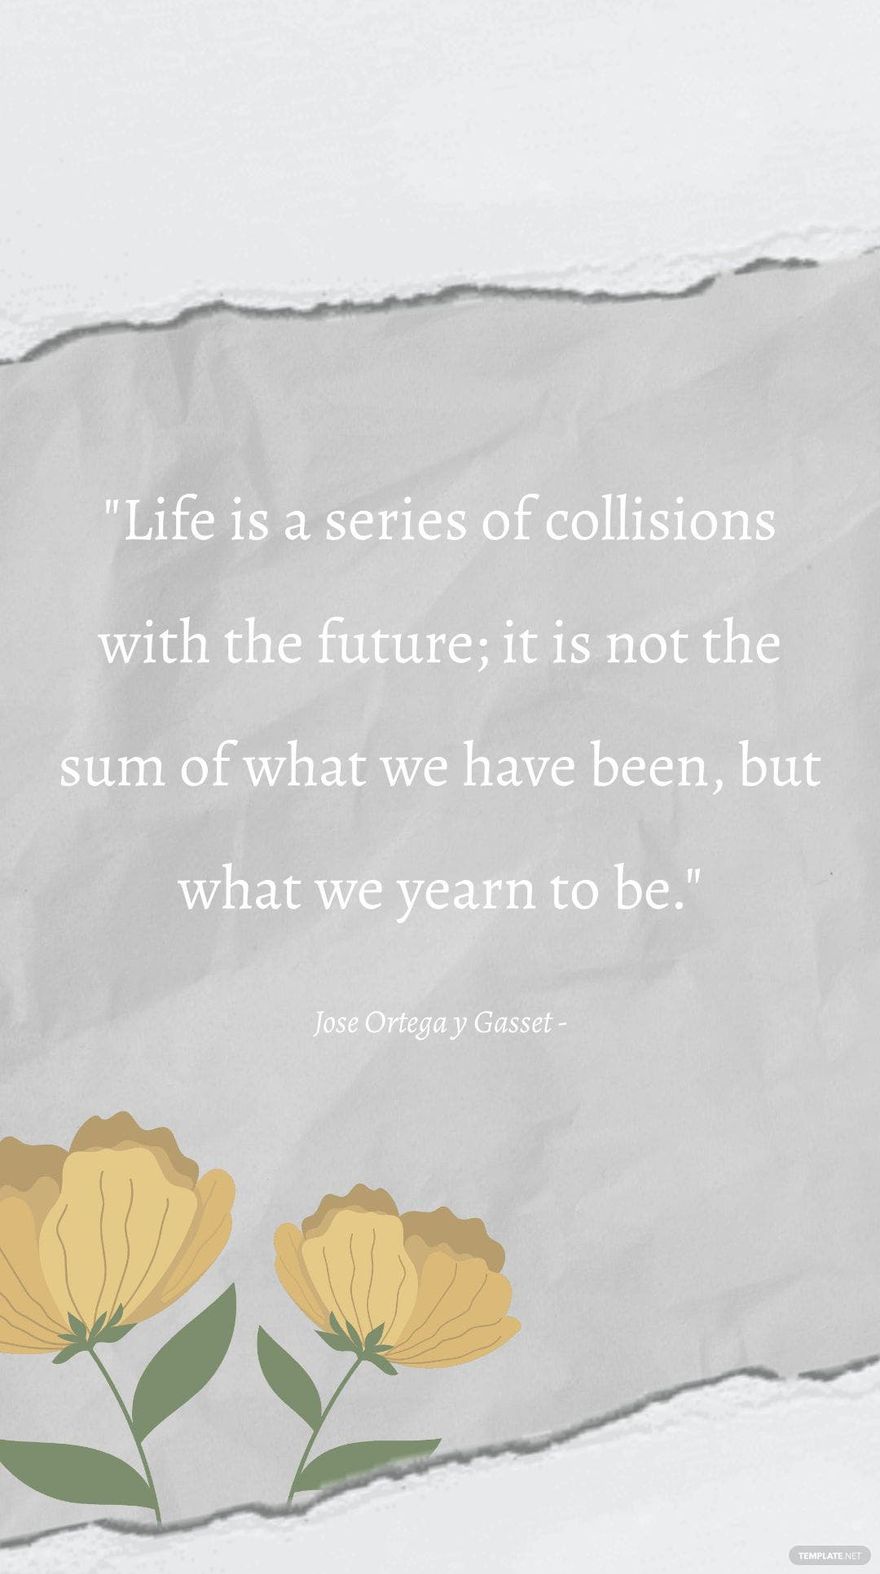 Jose Ortega y Gasset - Life is a series of collisions with the future; it is not the sum of what we have been, but what we yearn to be.